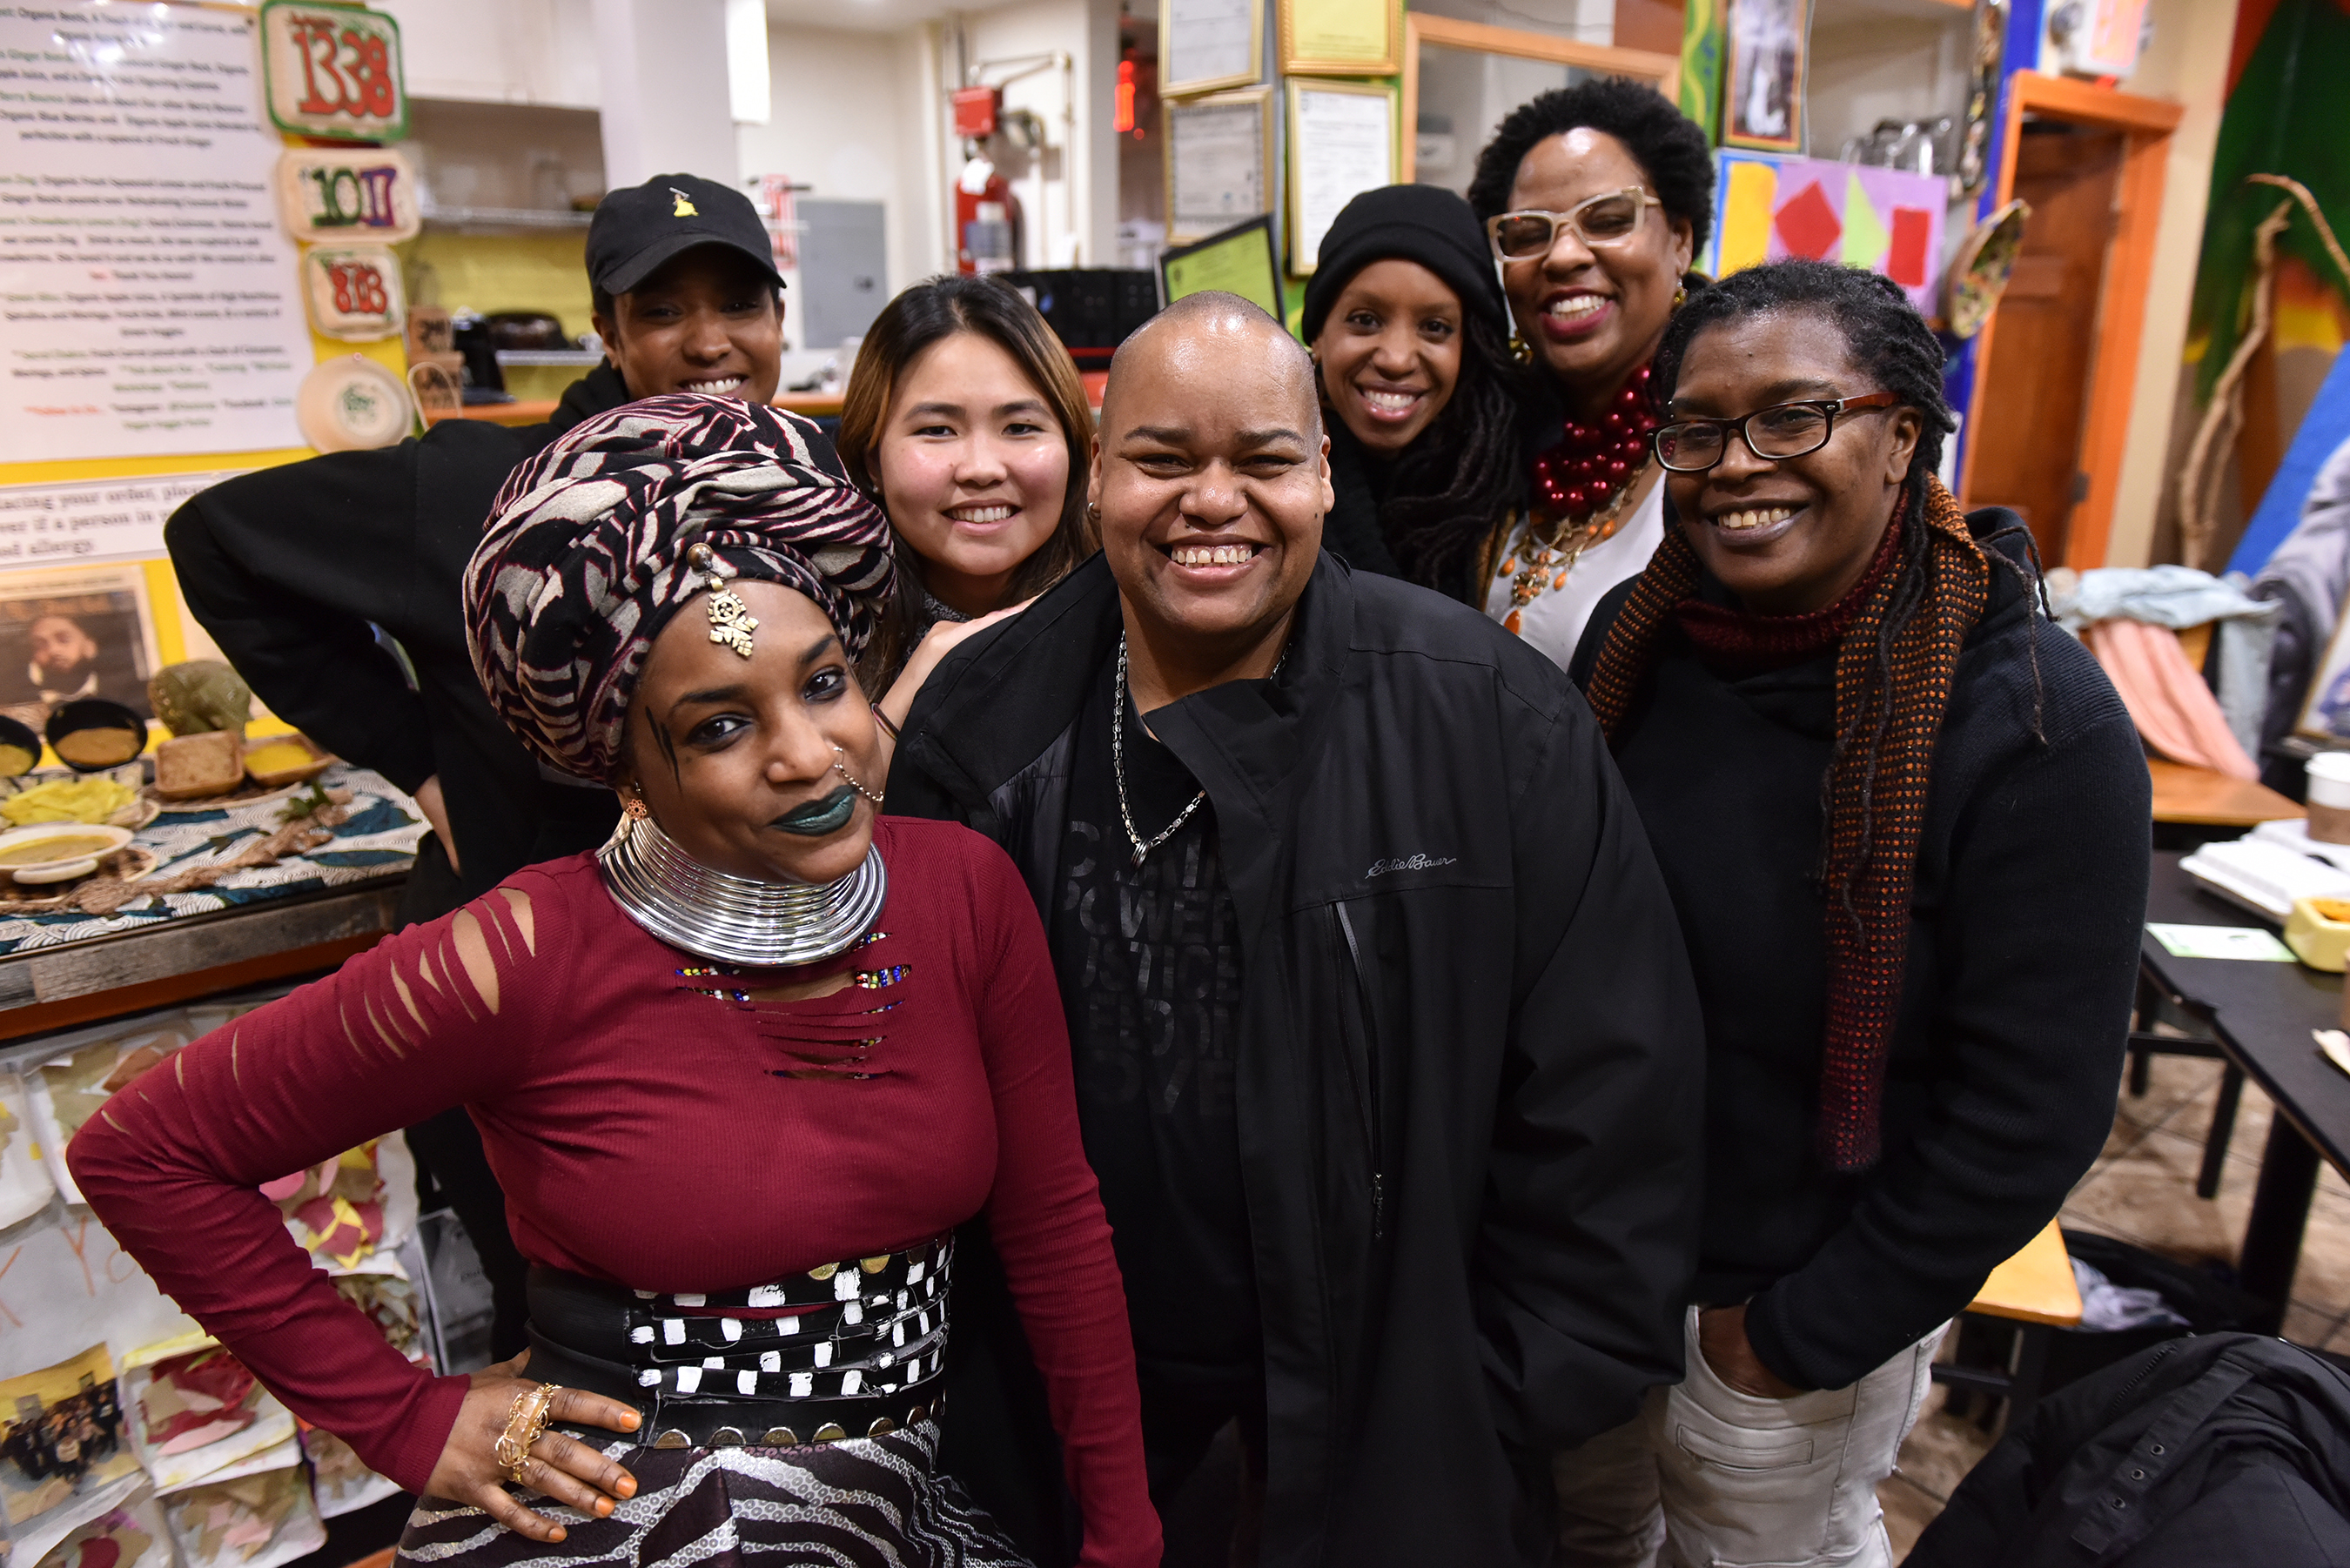 Boston artists (left to right) Nahdra Ra, Kendra Hicks, Ngoc-Tran Vu, Melissa Alexis, Latifa Ziyad and Letta Neely meet with Toshi Reagon (center) at Dorchester’s Oasis Vegan Veggie Parlor to discuss the Parable Path Boston.